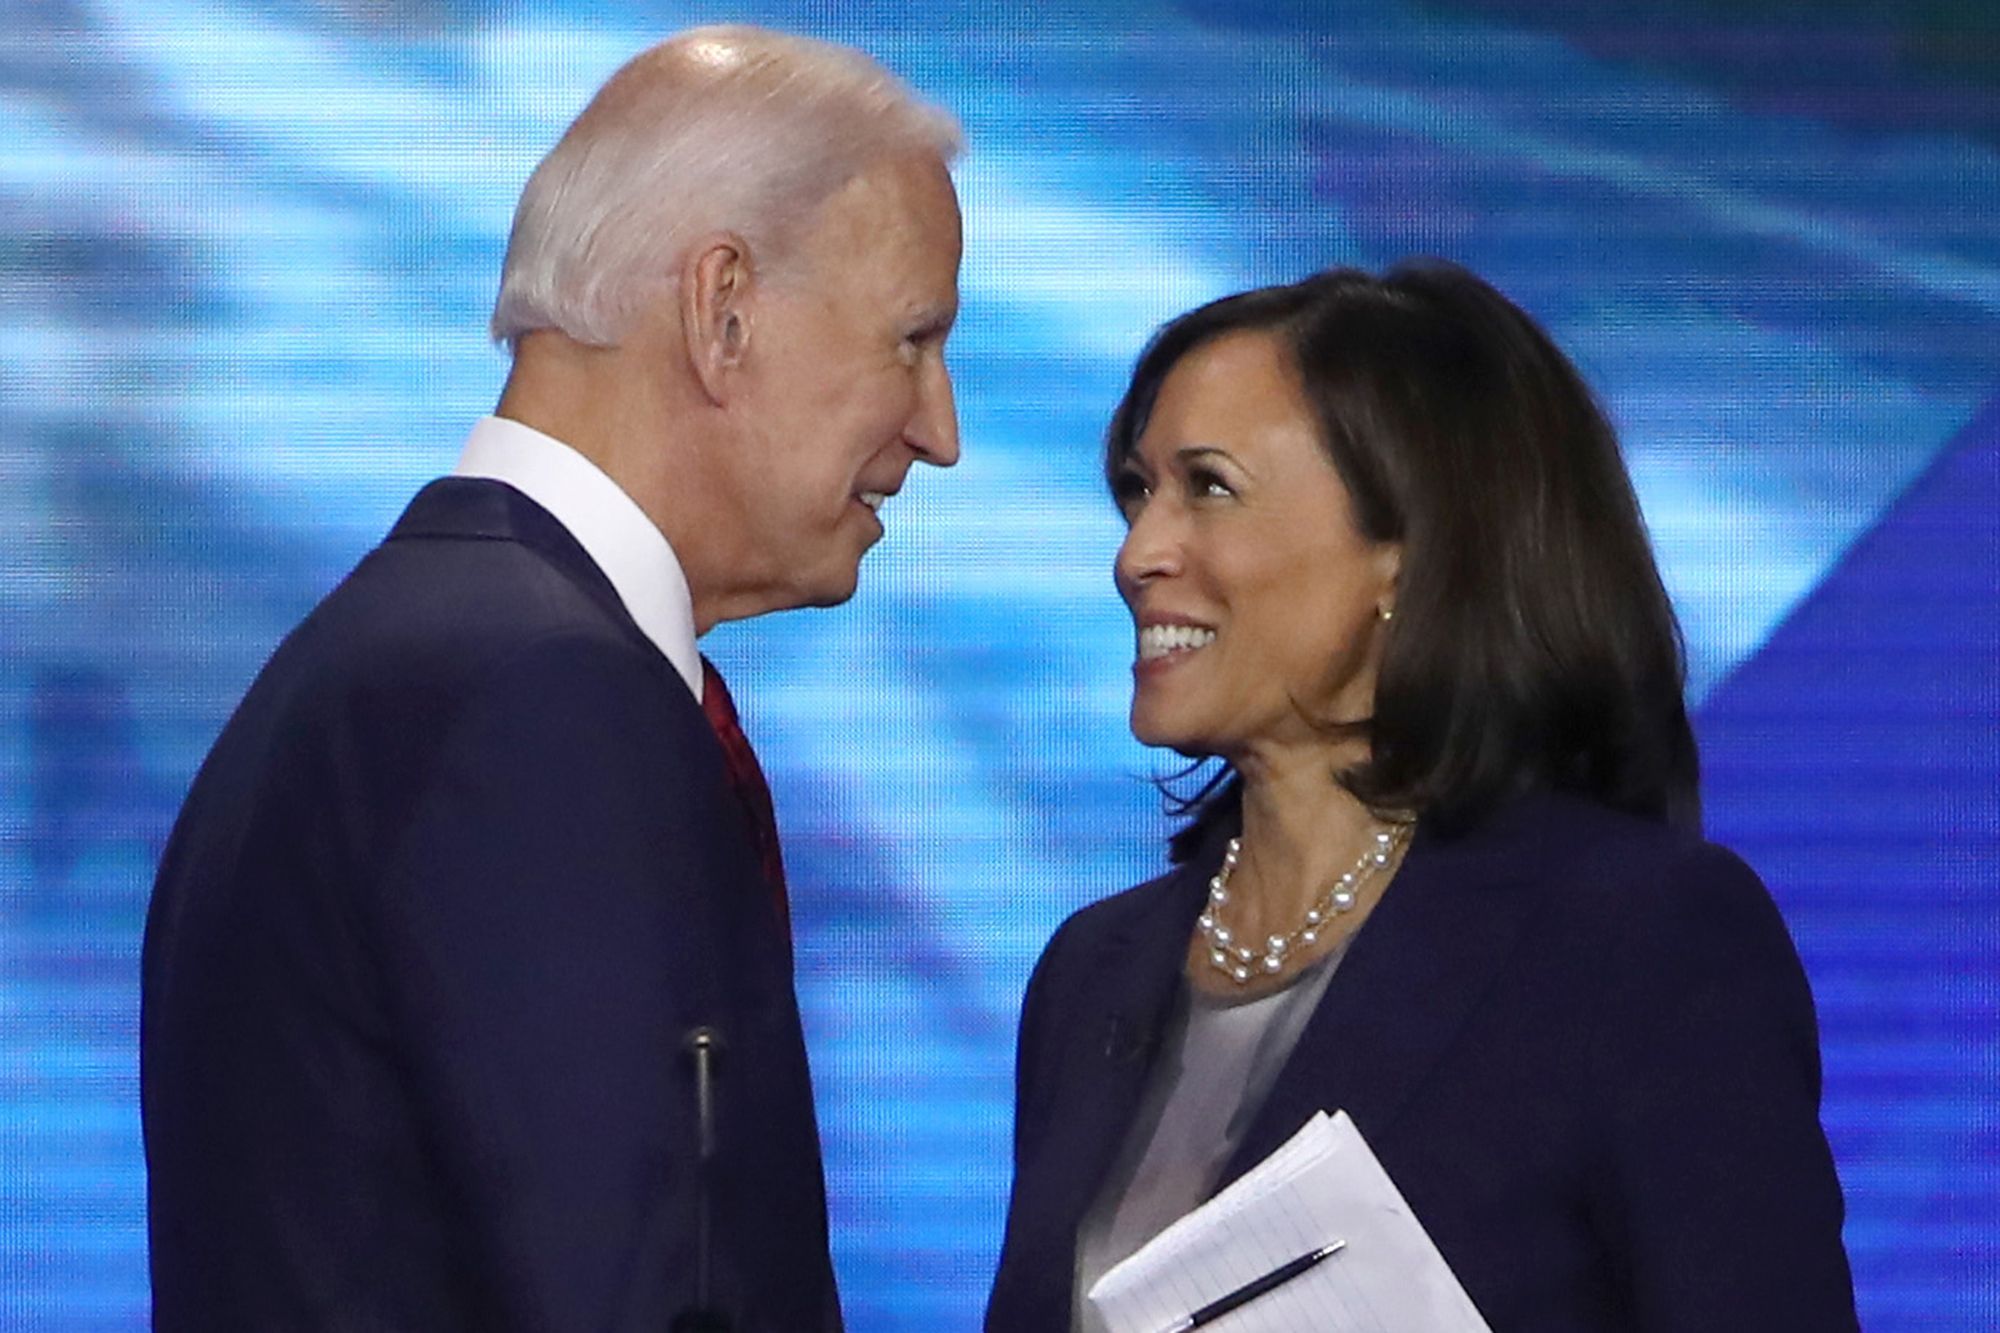 Biden spotted with Kamala Harris talking points amid VP speculation